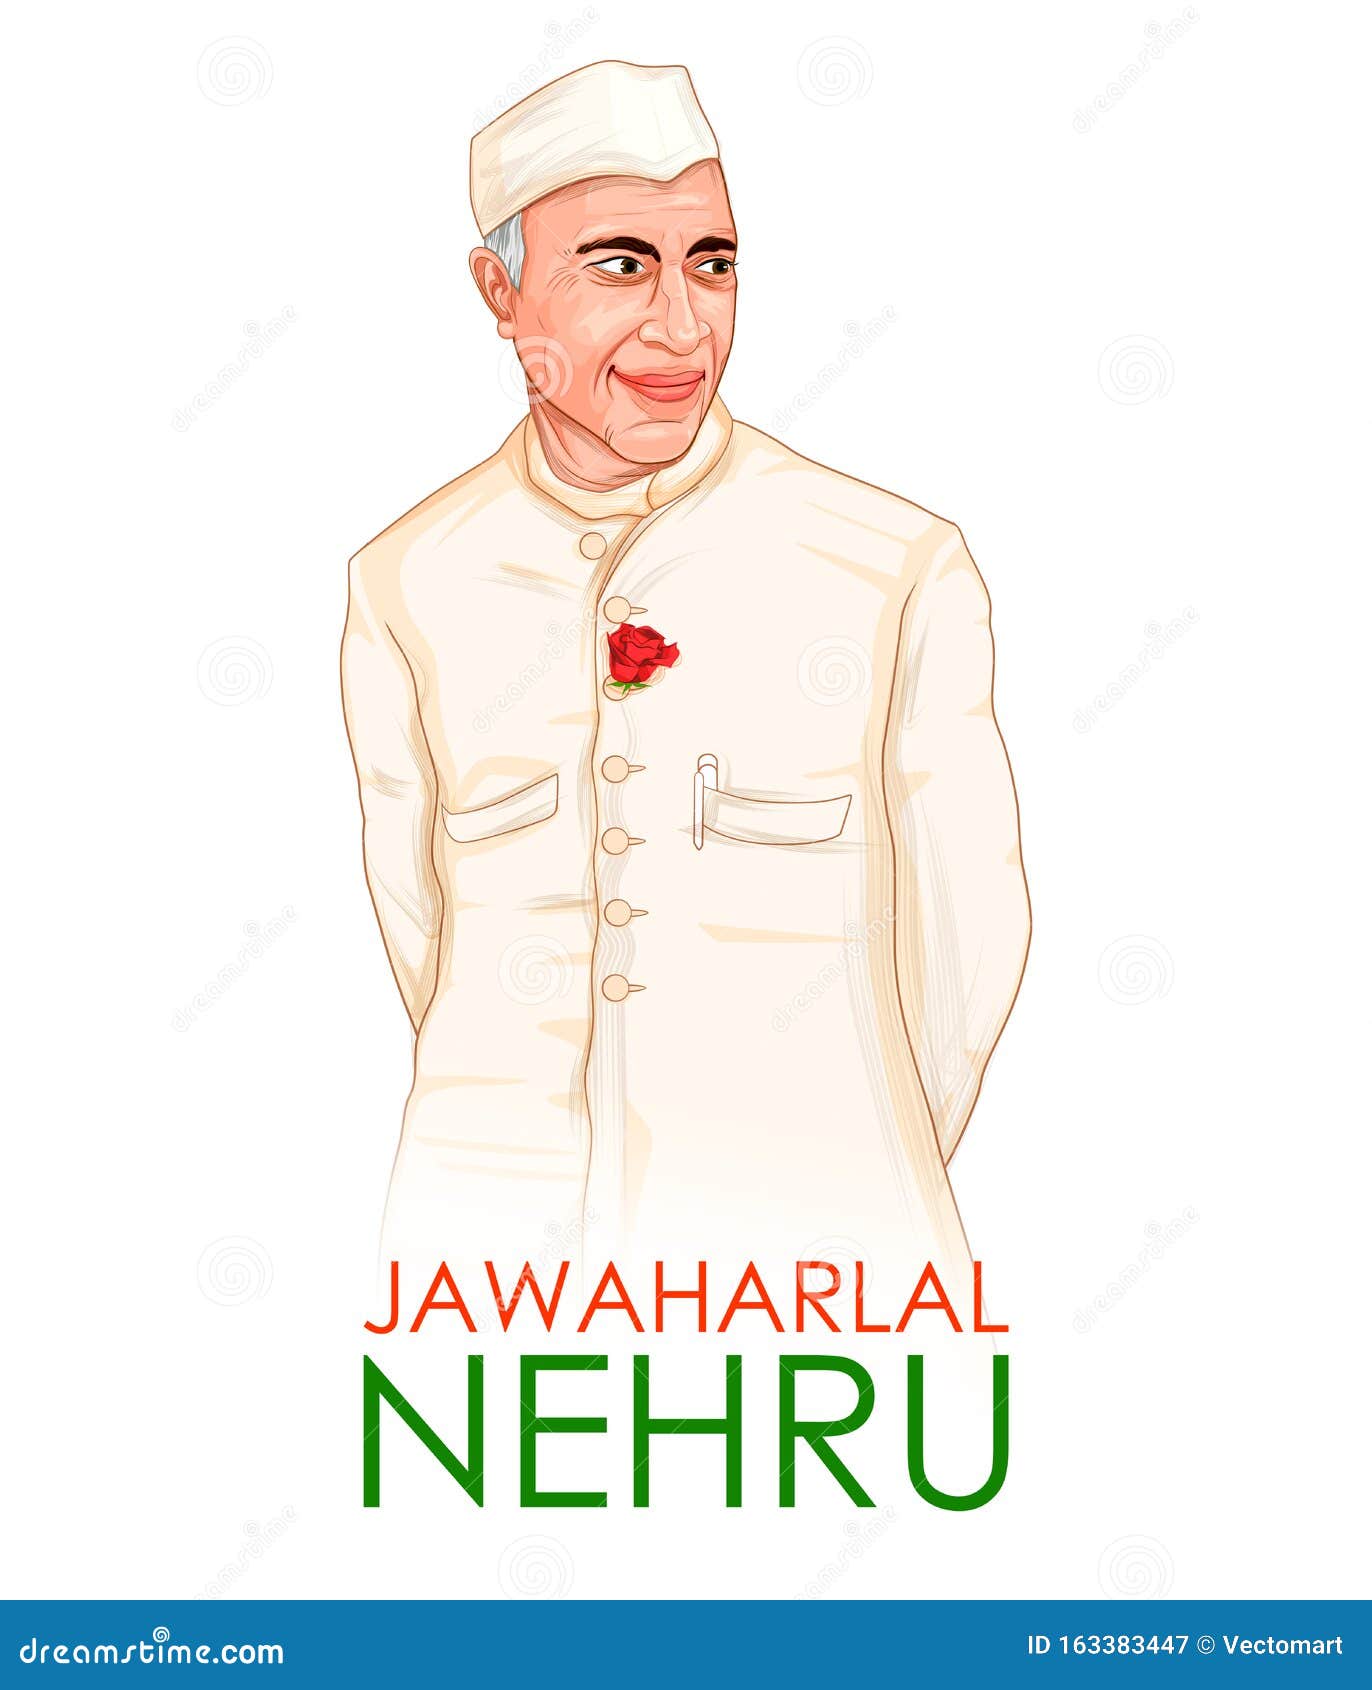 Jawaharlal Nehru | Biography, Significance, Family, Wife, Daughter, Death,  & Facts | Britannica